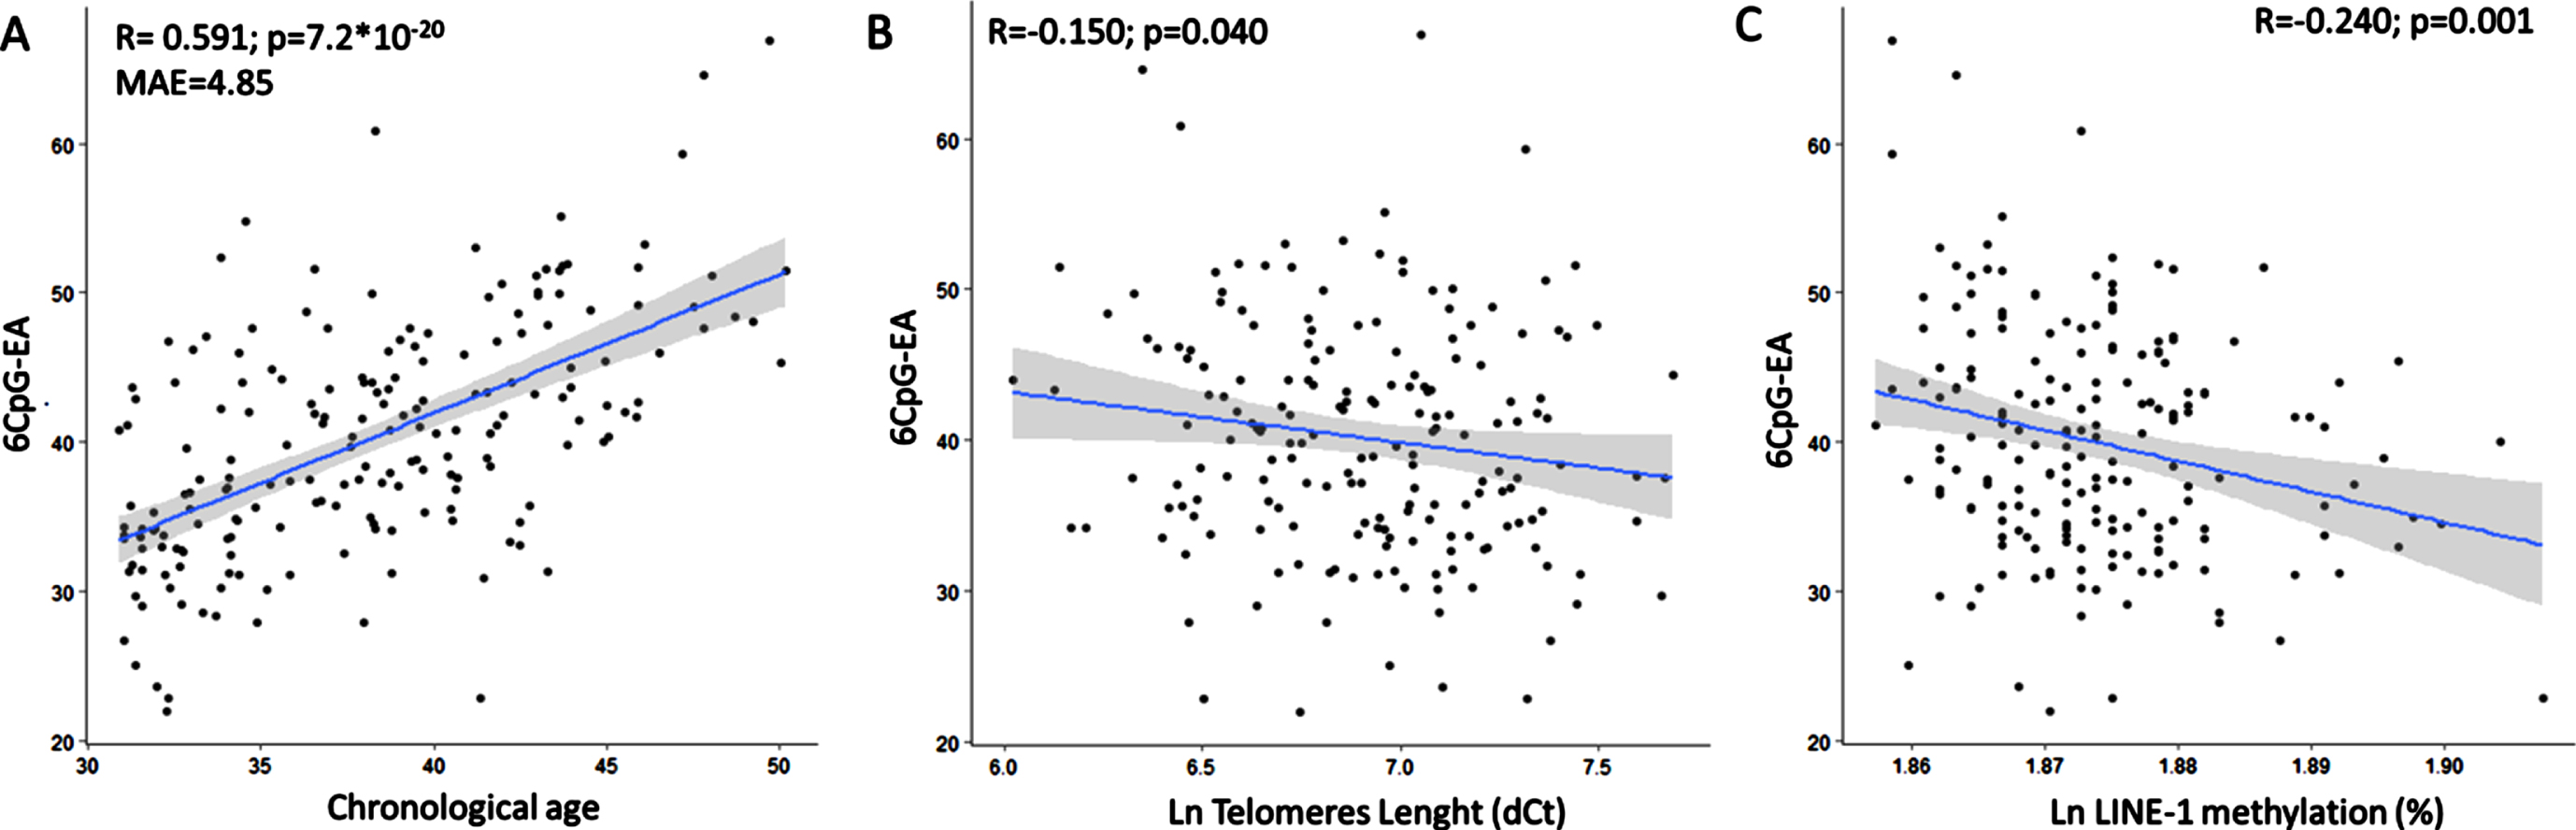 The 6CpG-EA is highly correlated with the chronological age (A). The 6CpG-EA is negatively correlated with telomeres length (B) and LINE-1 methylation levels (C). MAE: Mean Absolute Error.